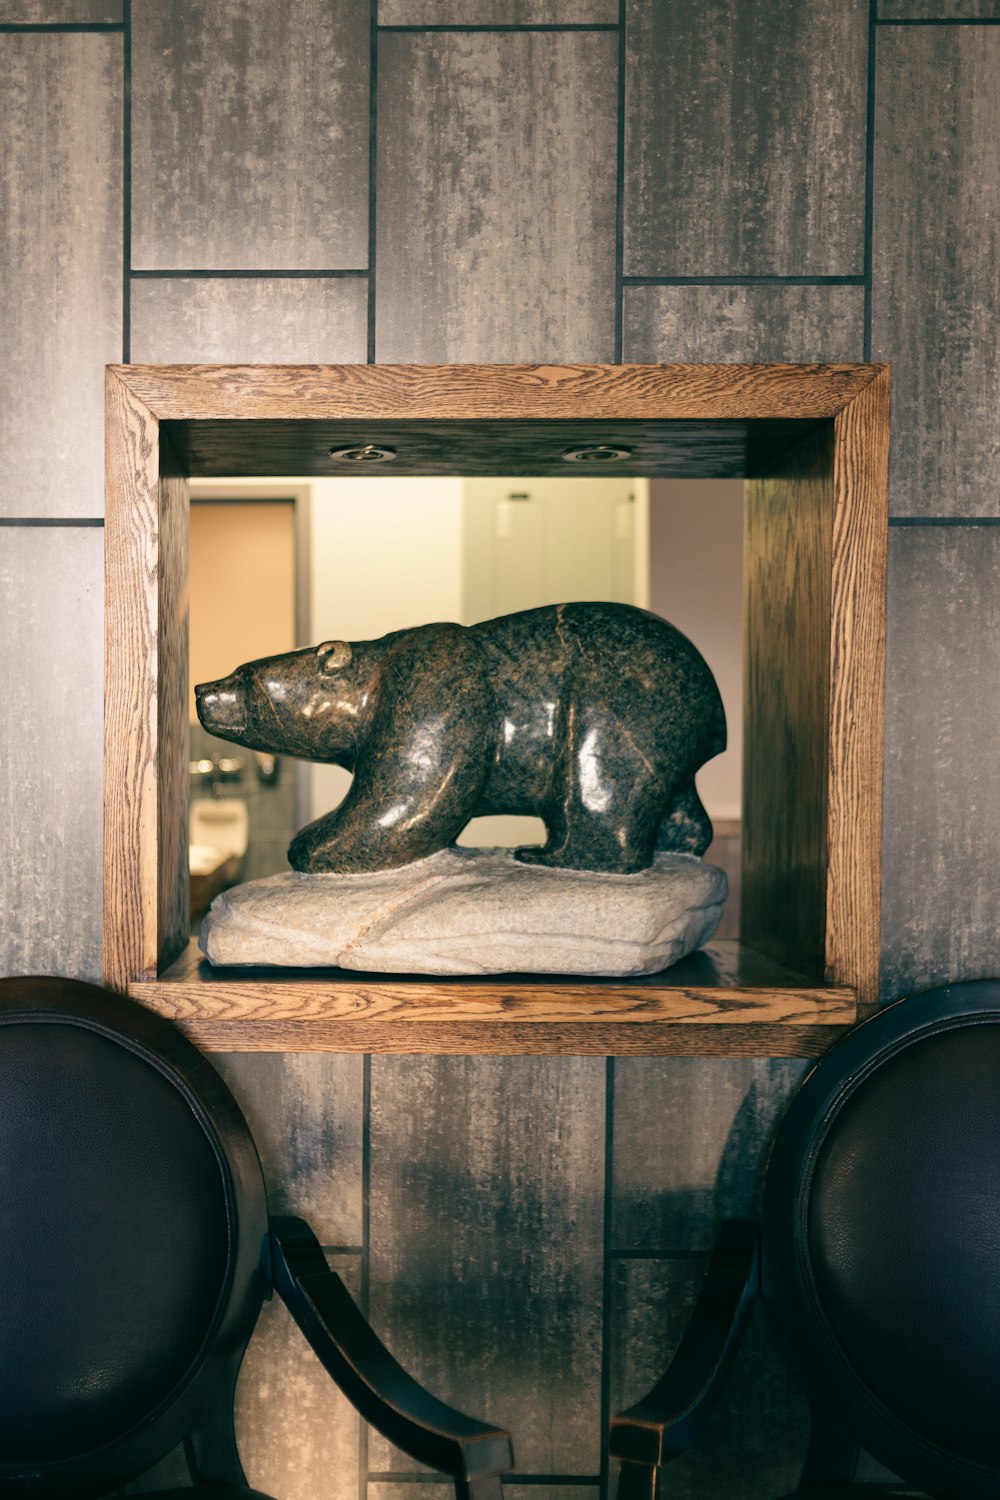 a statue of a bear in a wooden frame